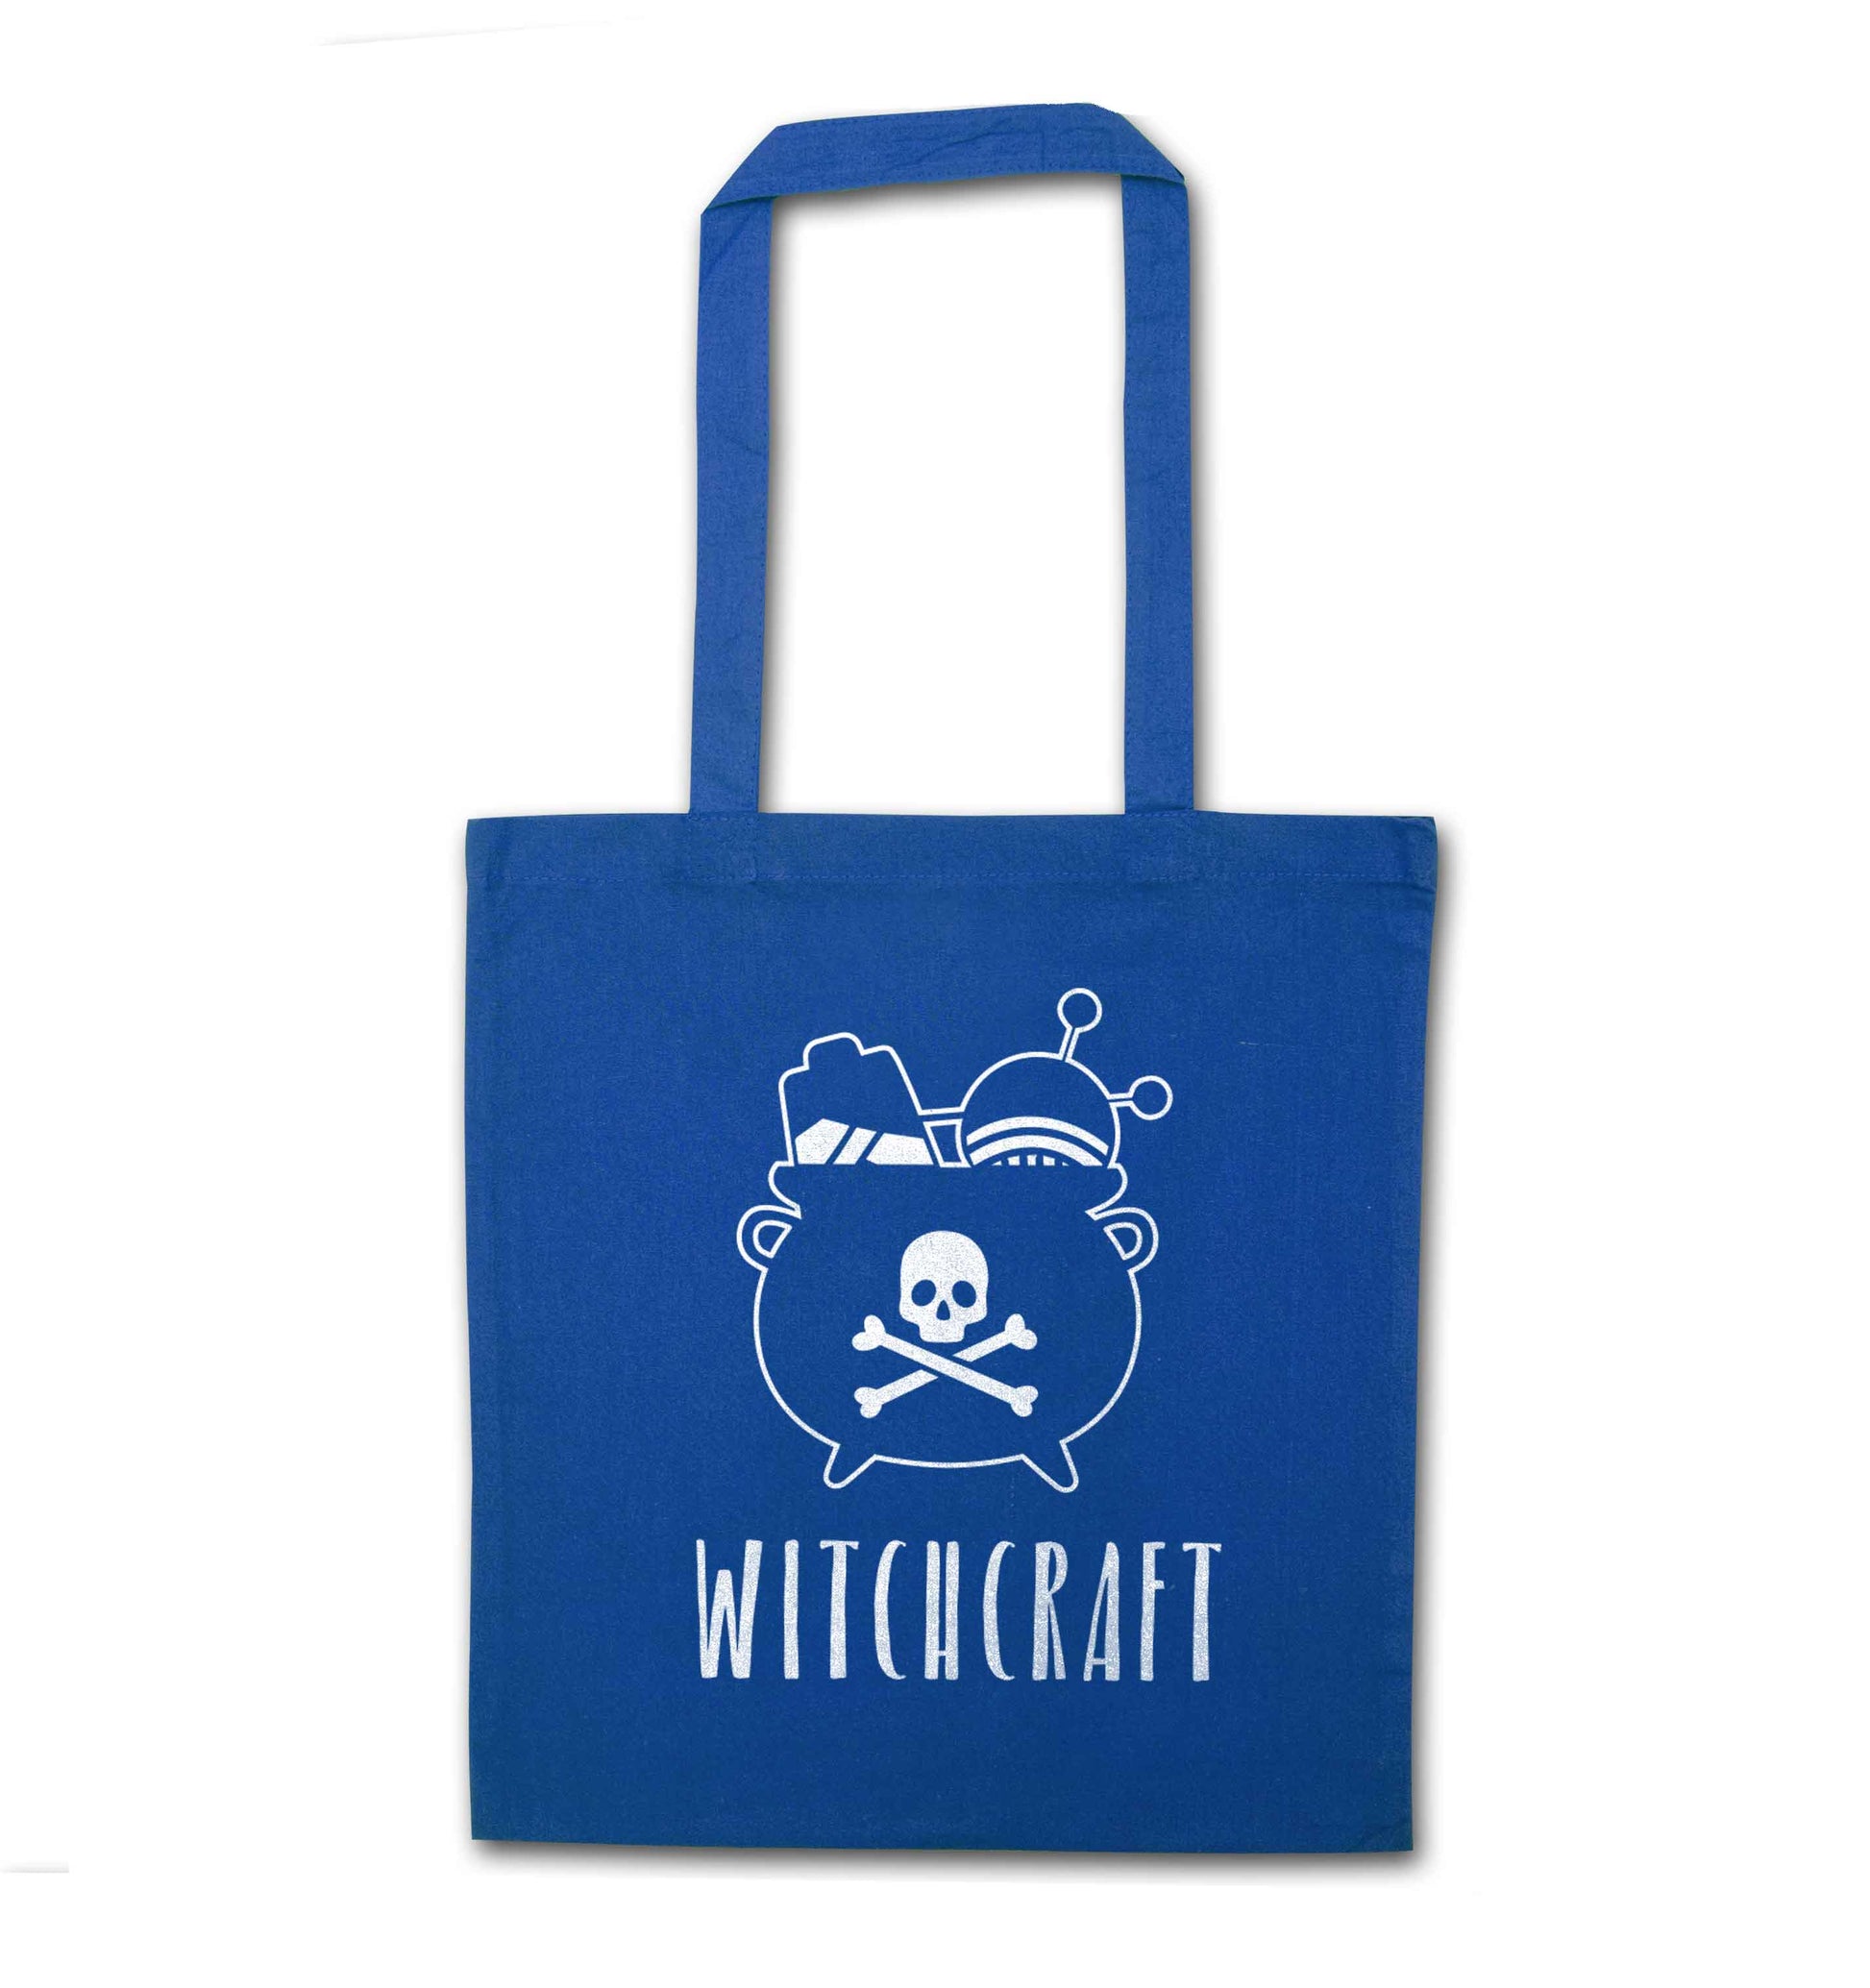 Witchcraft blue tote bag